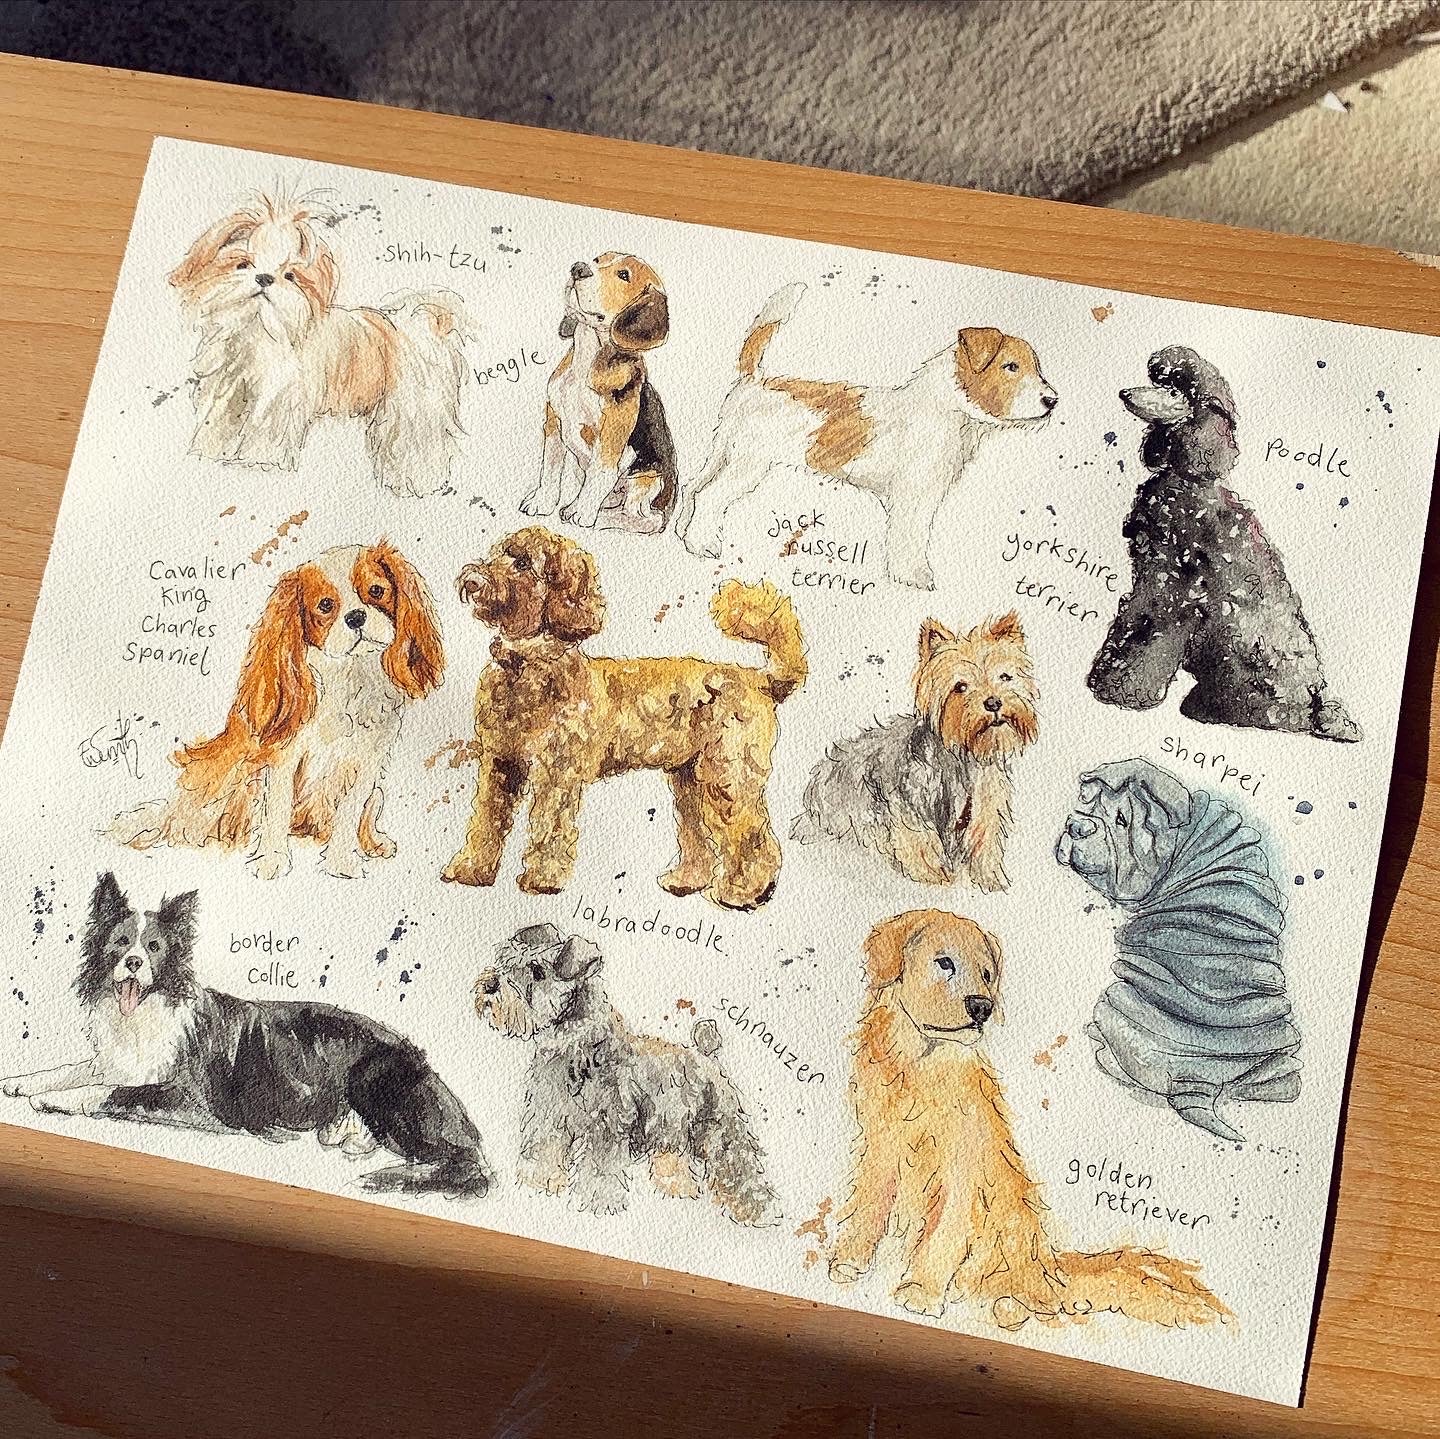 Original watercolour illustrations of different popular dog breeds by Cleethorpes artist, Eve Leoni Smith.